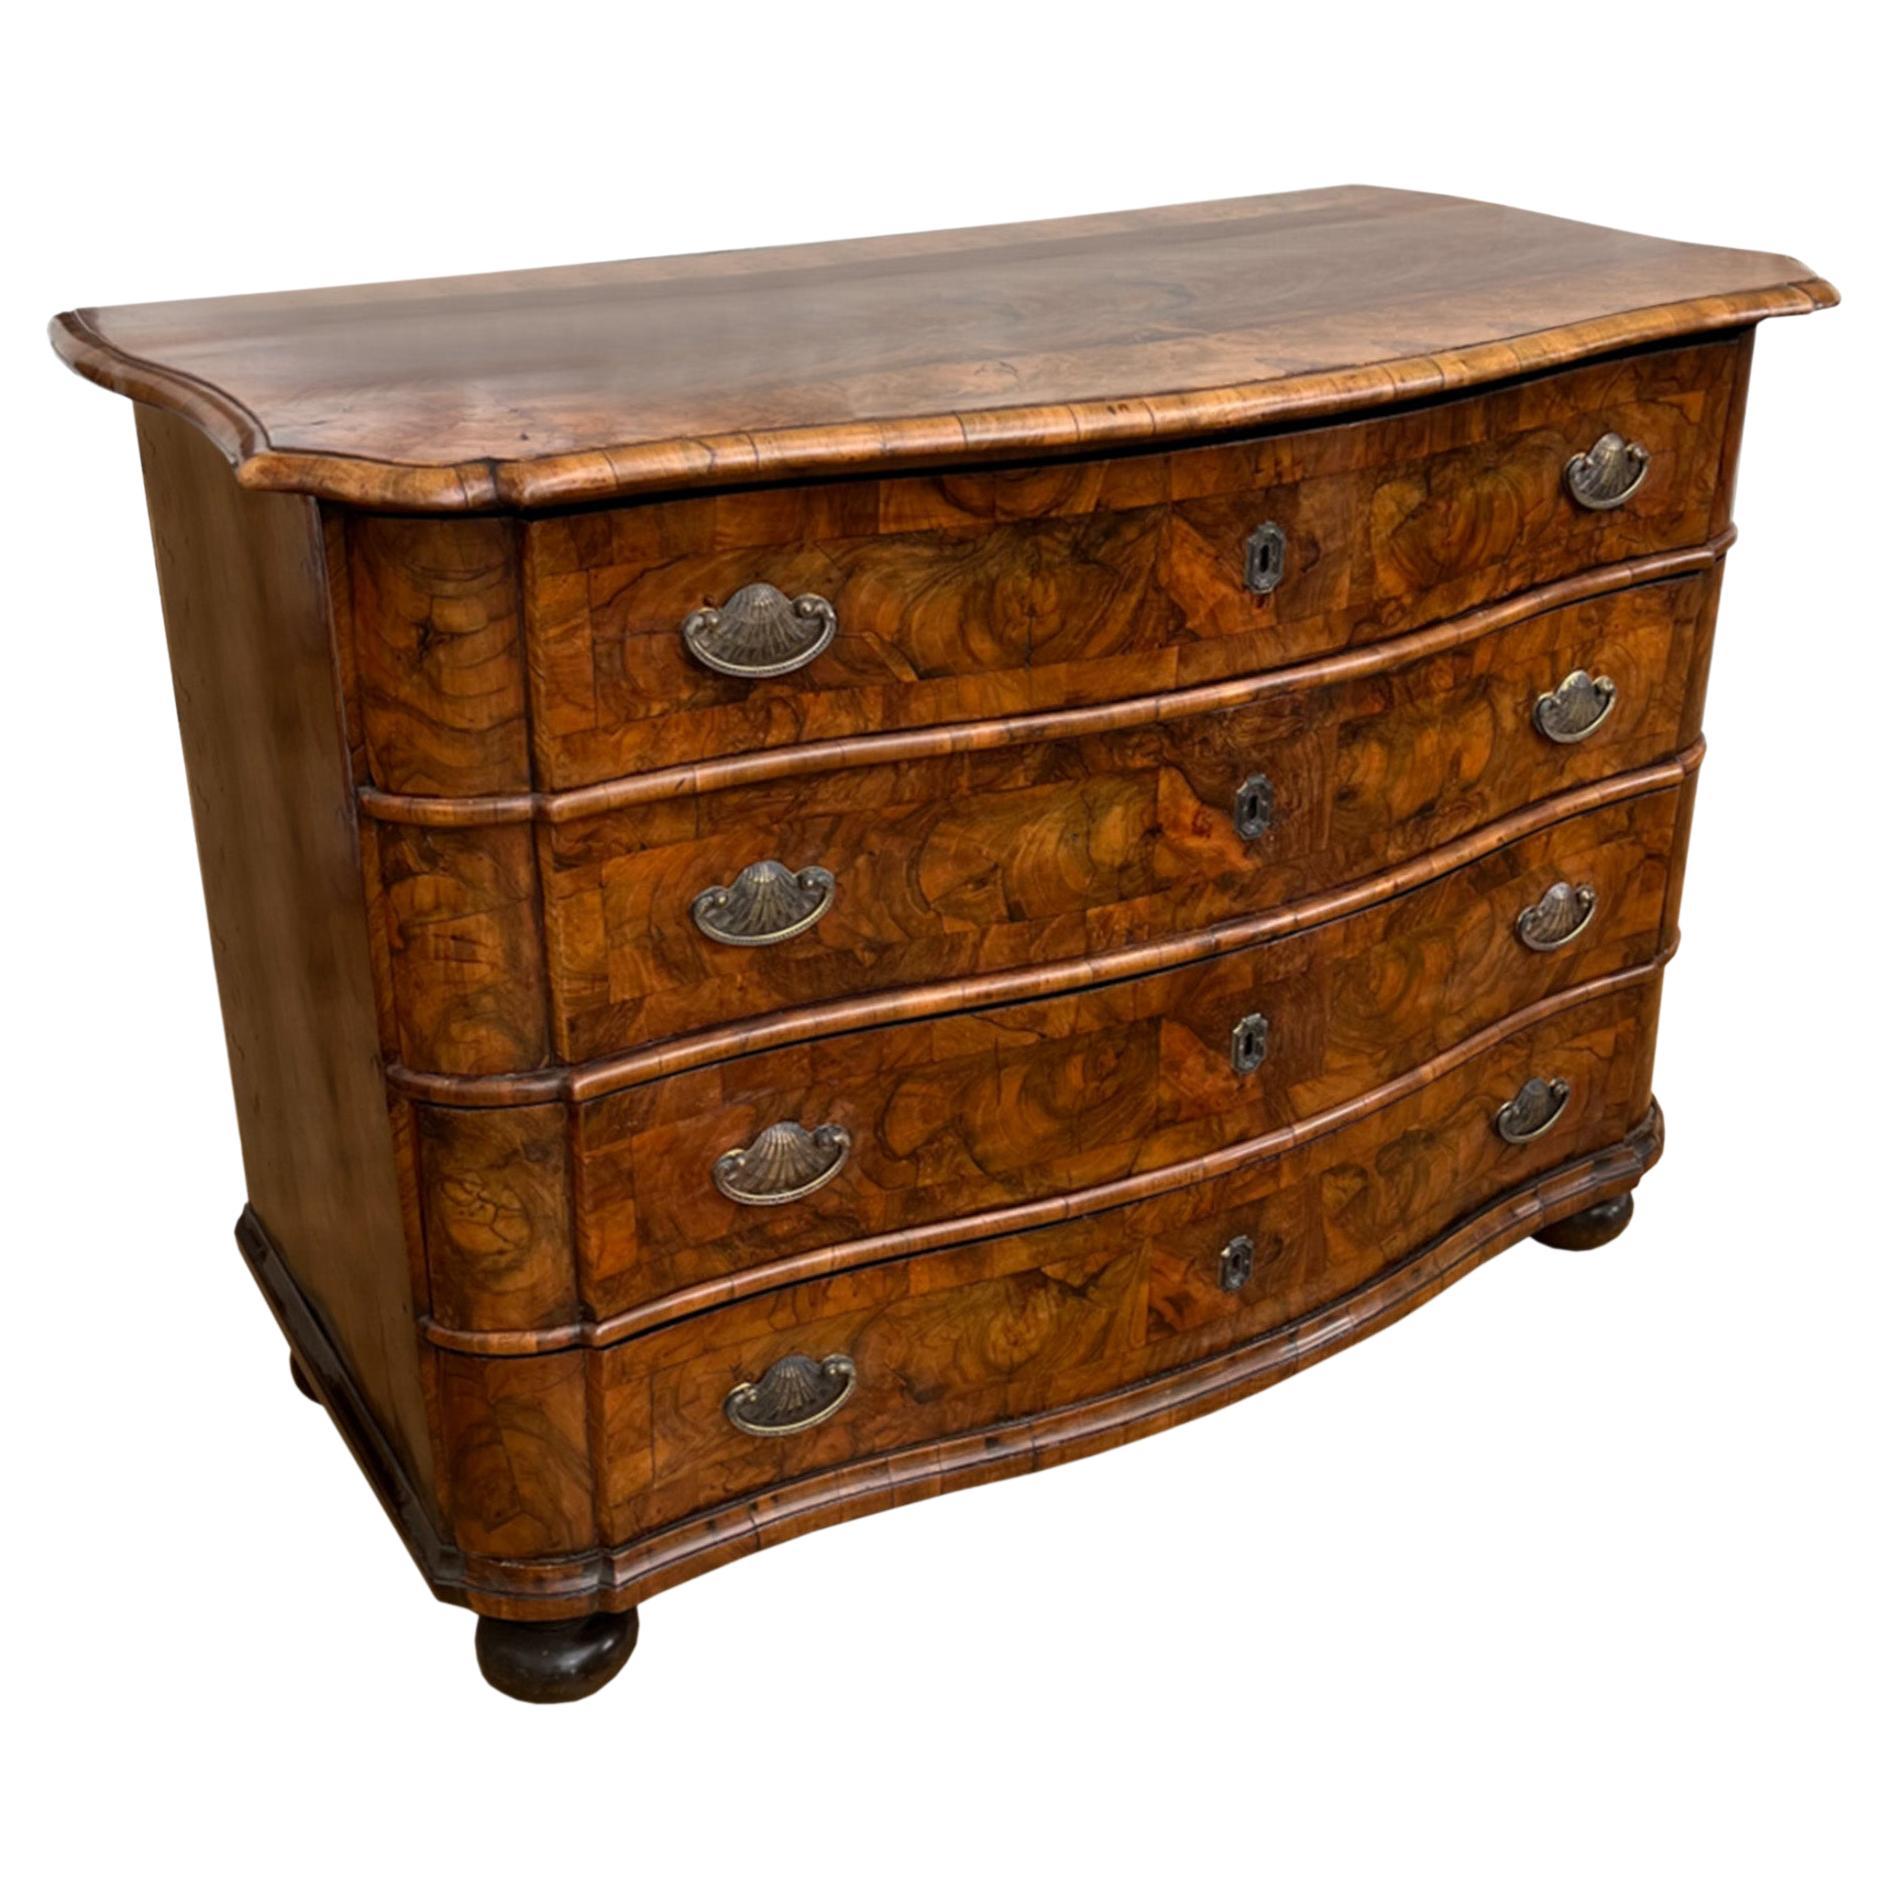 French 18th Century Chest of Drawers with Serpentine Front